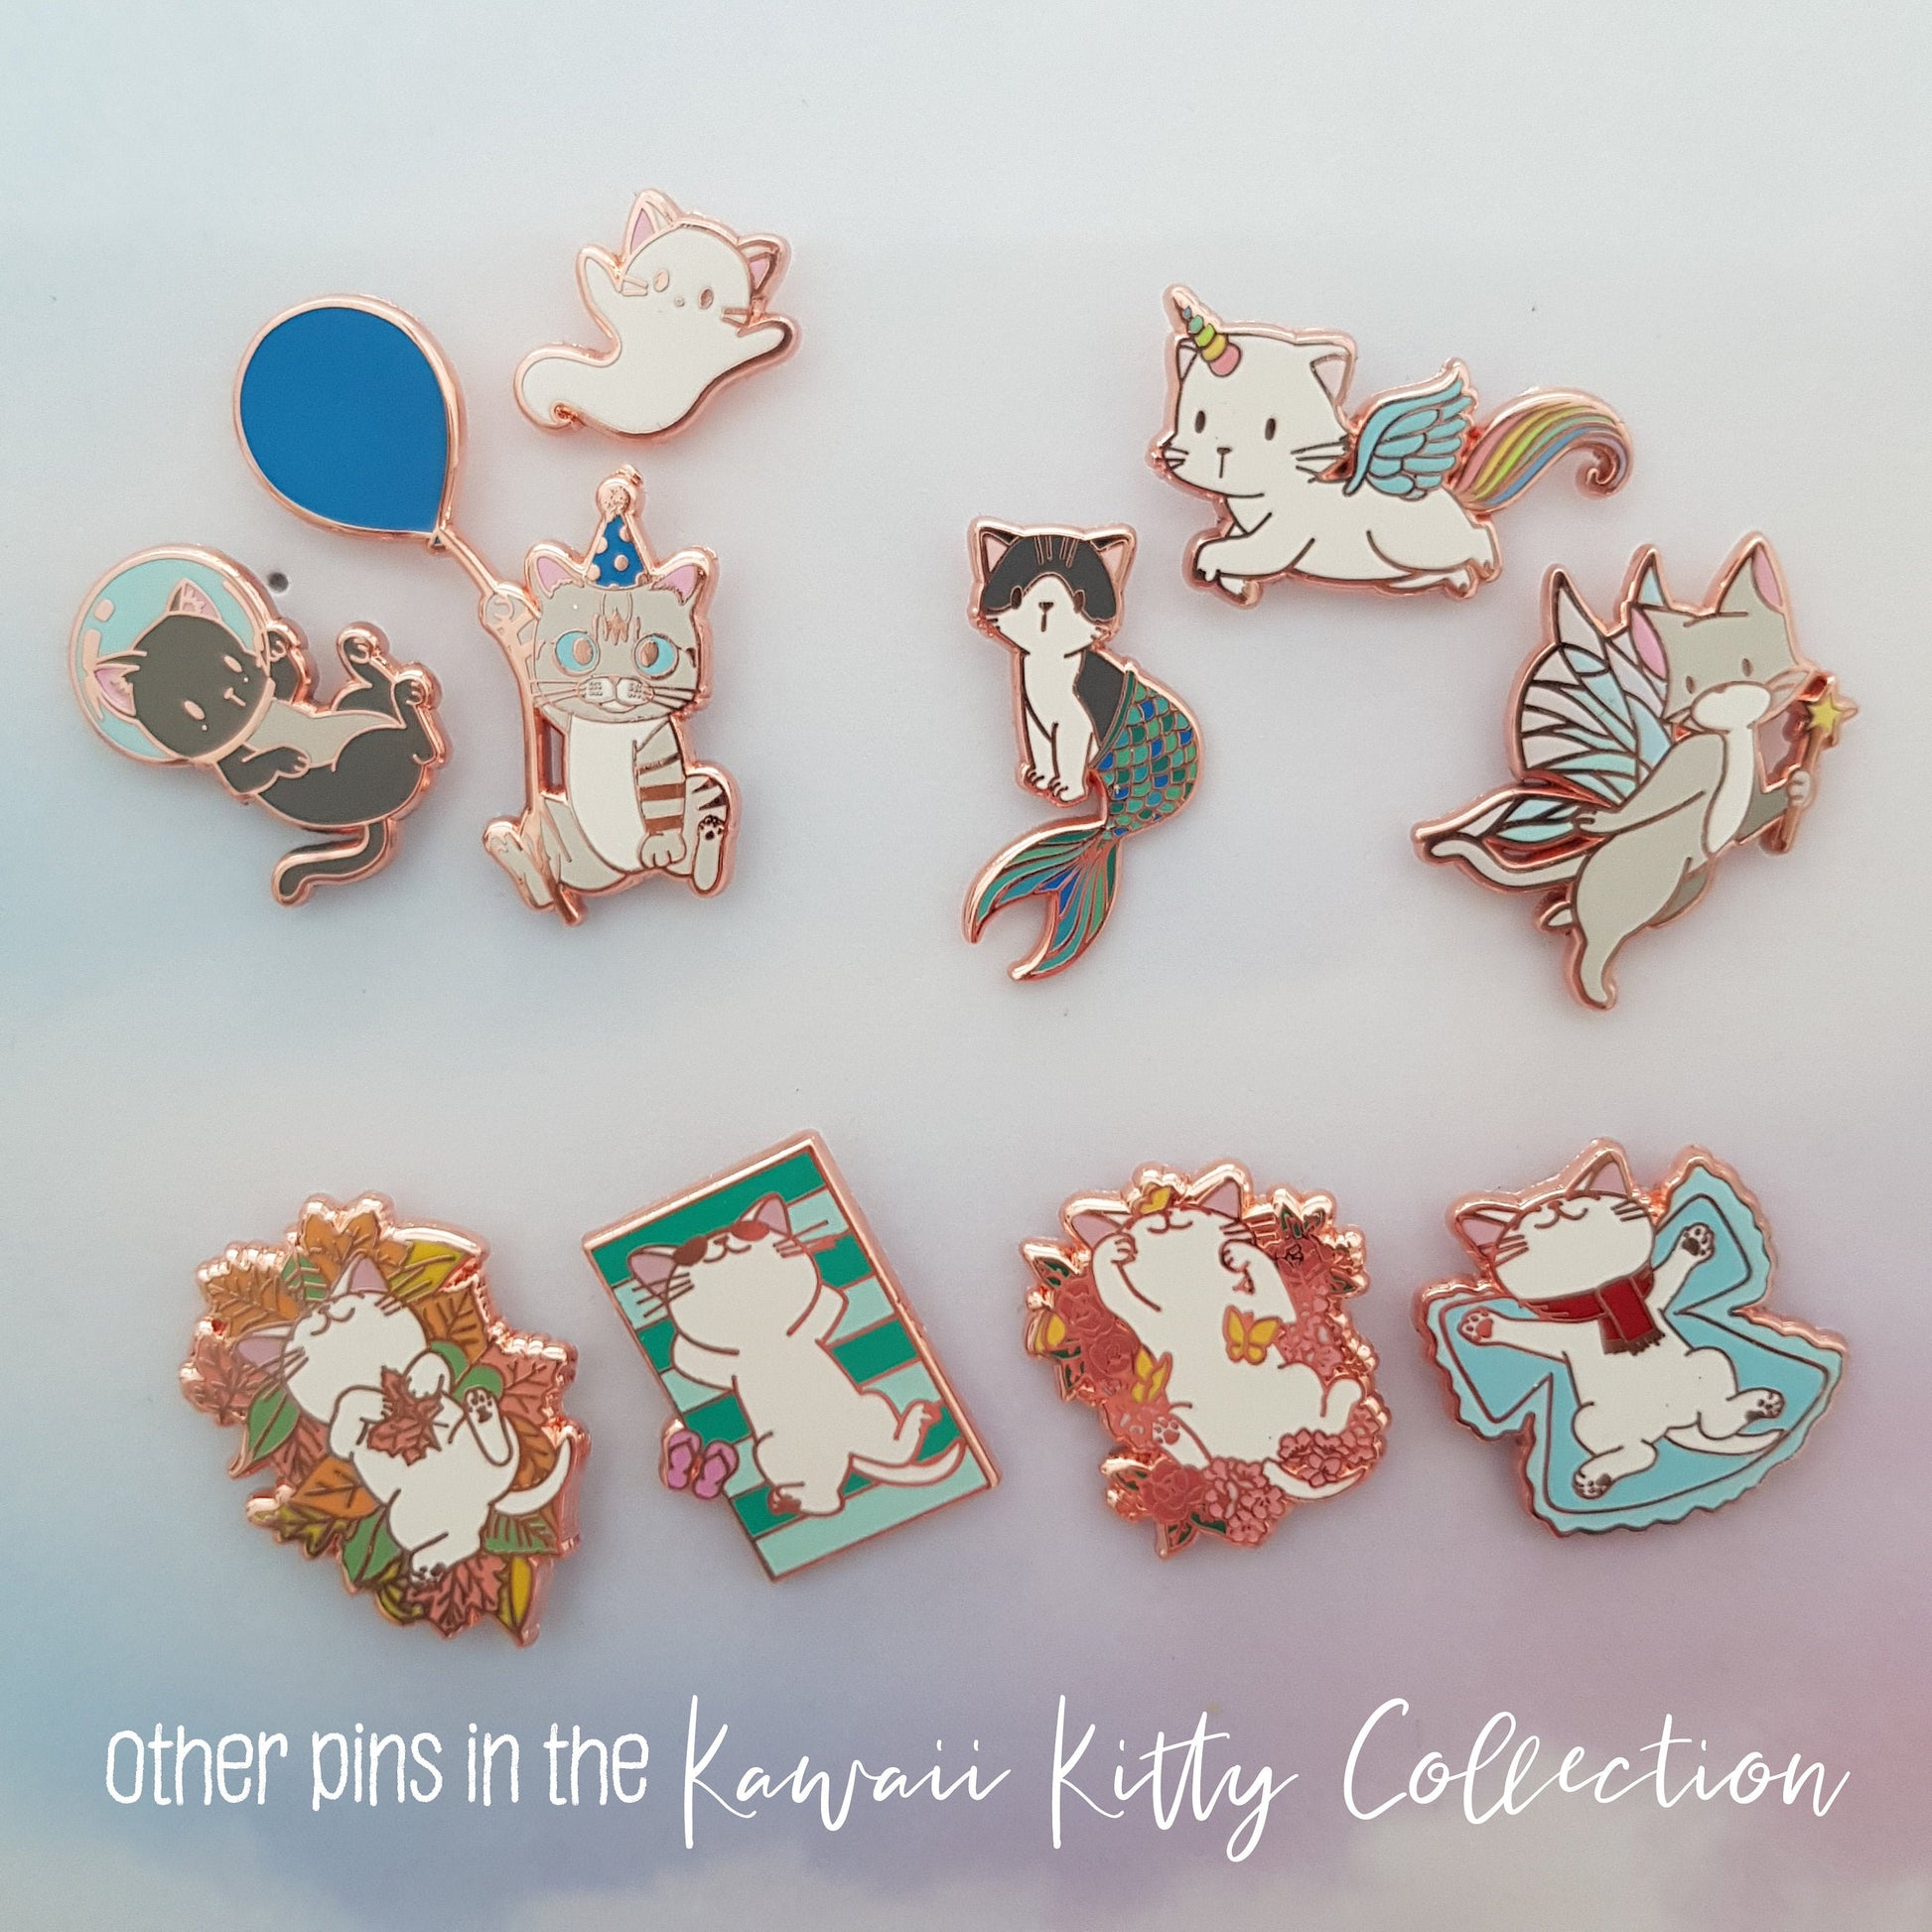 Kitties in Season Collection - Winter, Spring, Summer, Autumn (Set of 4 Enamel Pins), Pins, Brooches & Lapel Pins